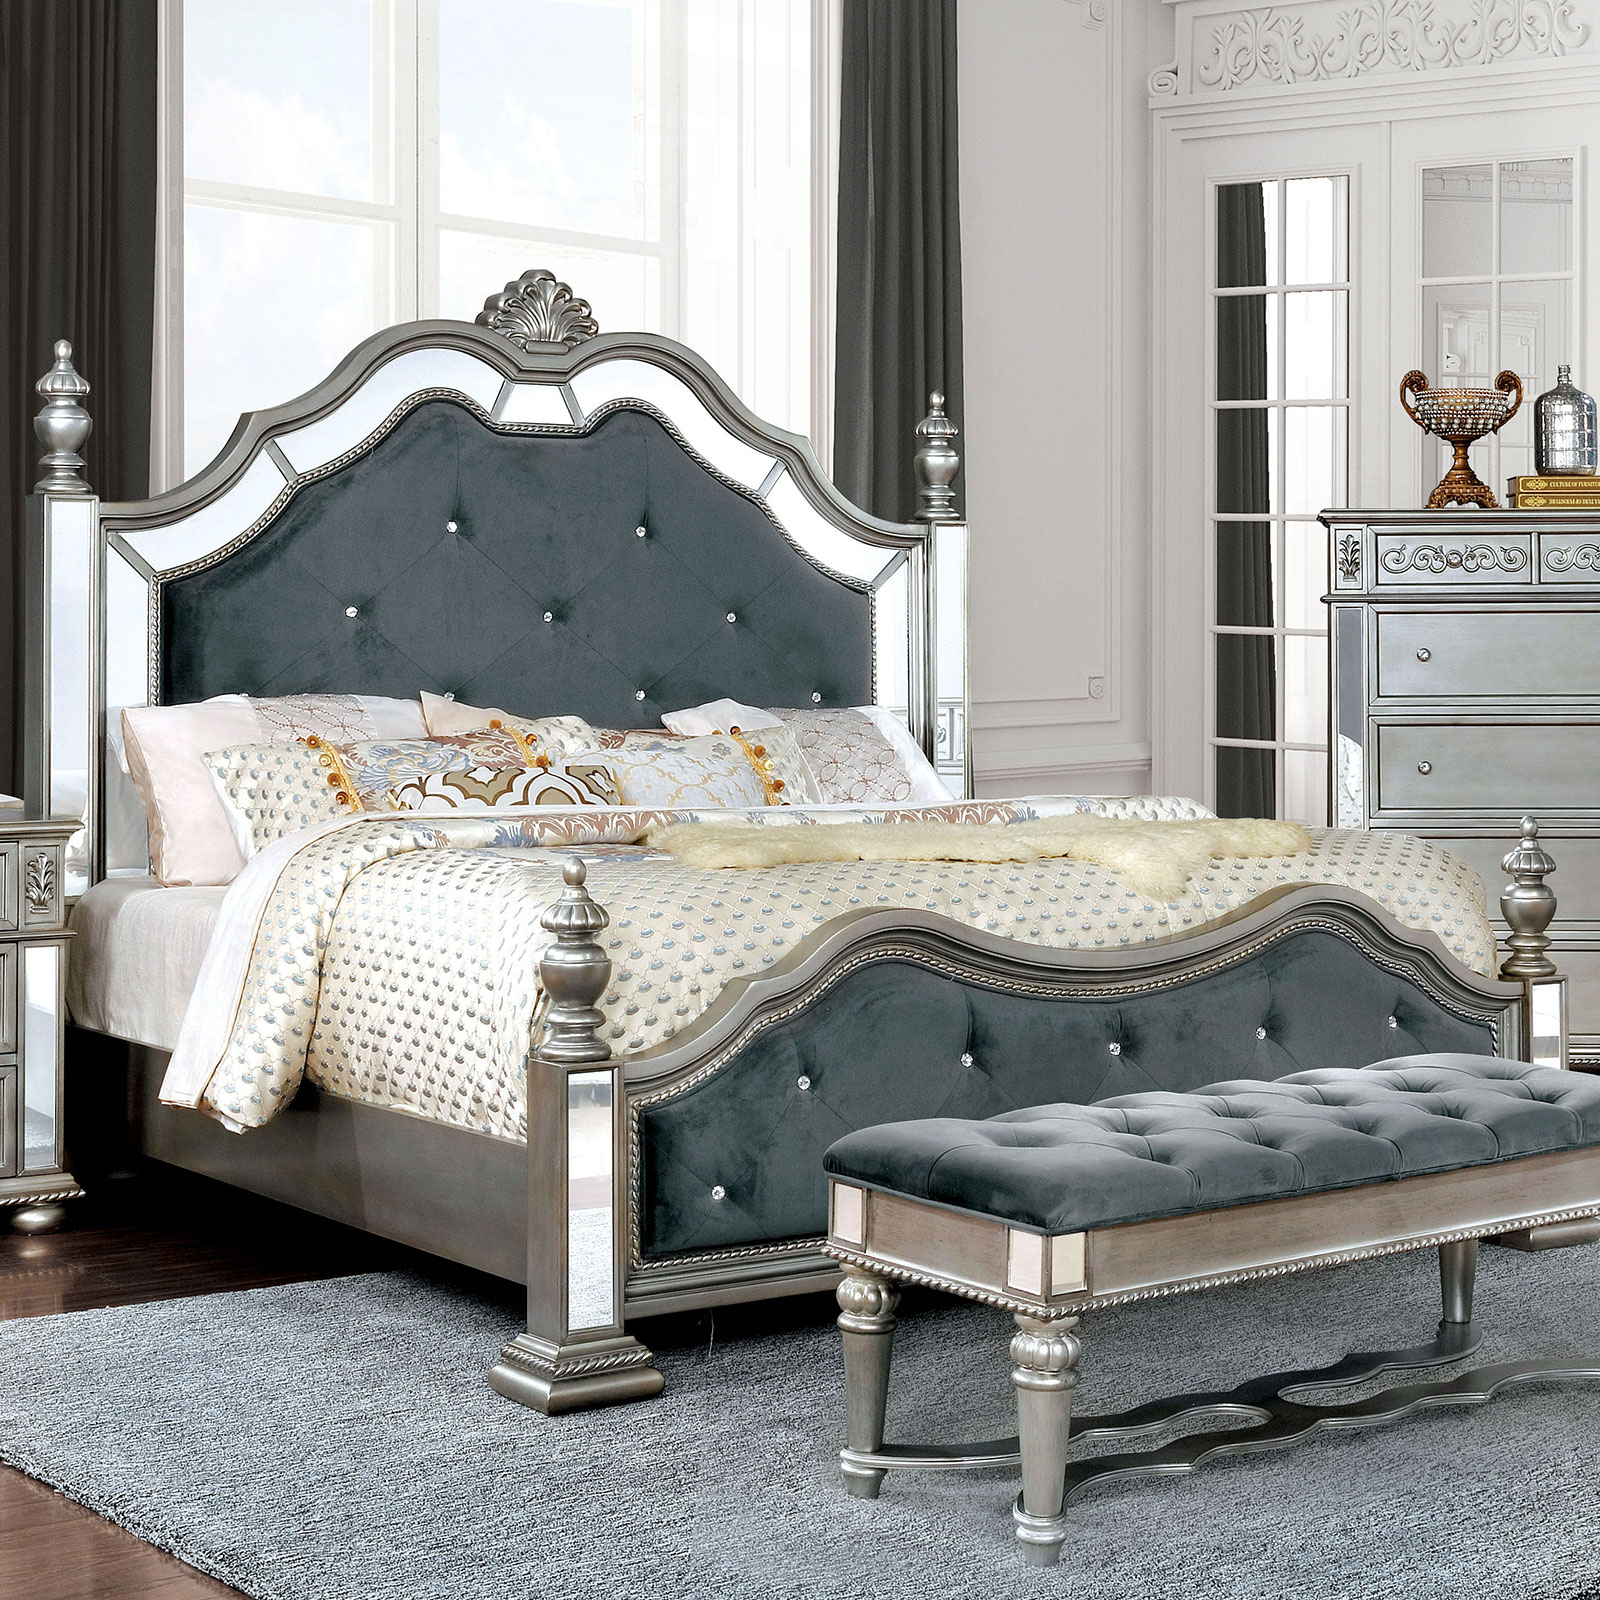 Bed Mirror Trim Tufted Padded Hb, California King Bed Frames Bedroom Furniture